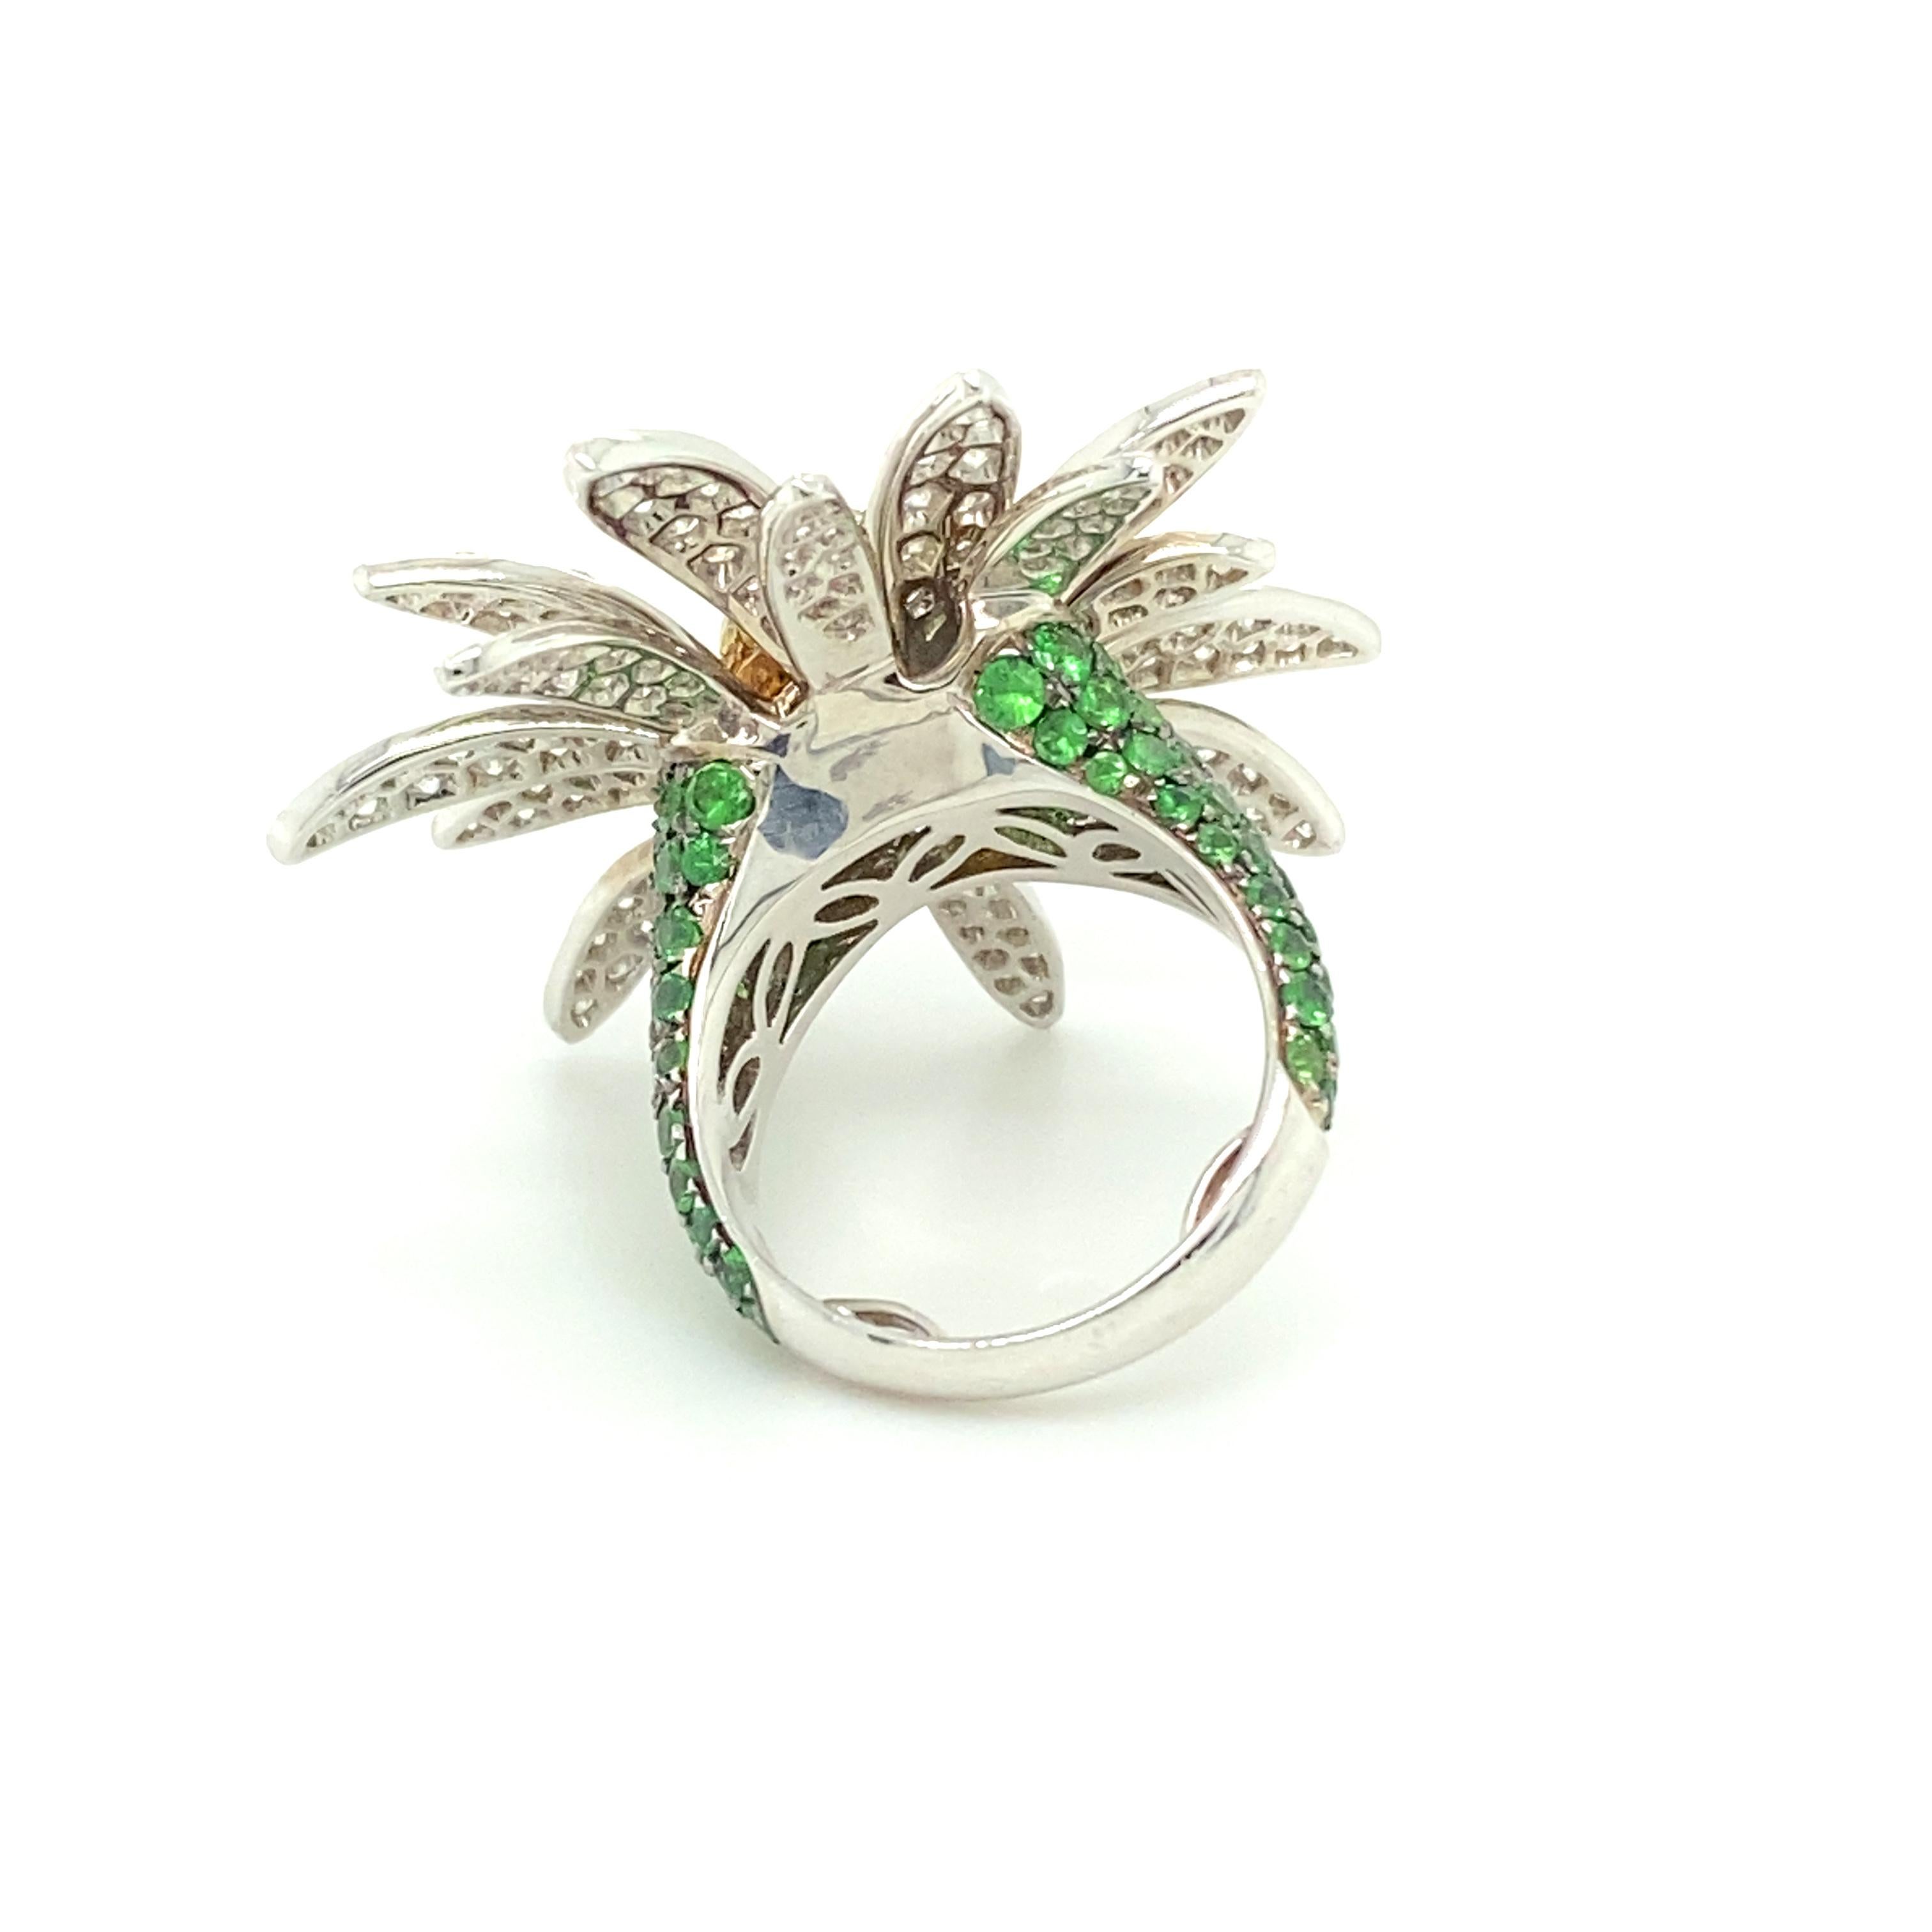 Daisy Ring with Diamonds and Tsavorites in 18 Karat White Gold by SILLAM 1835 6